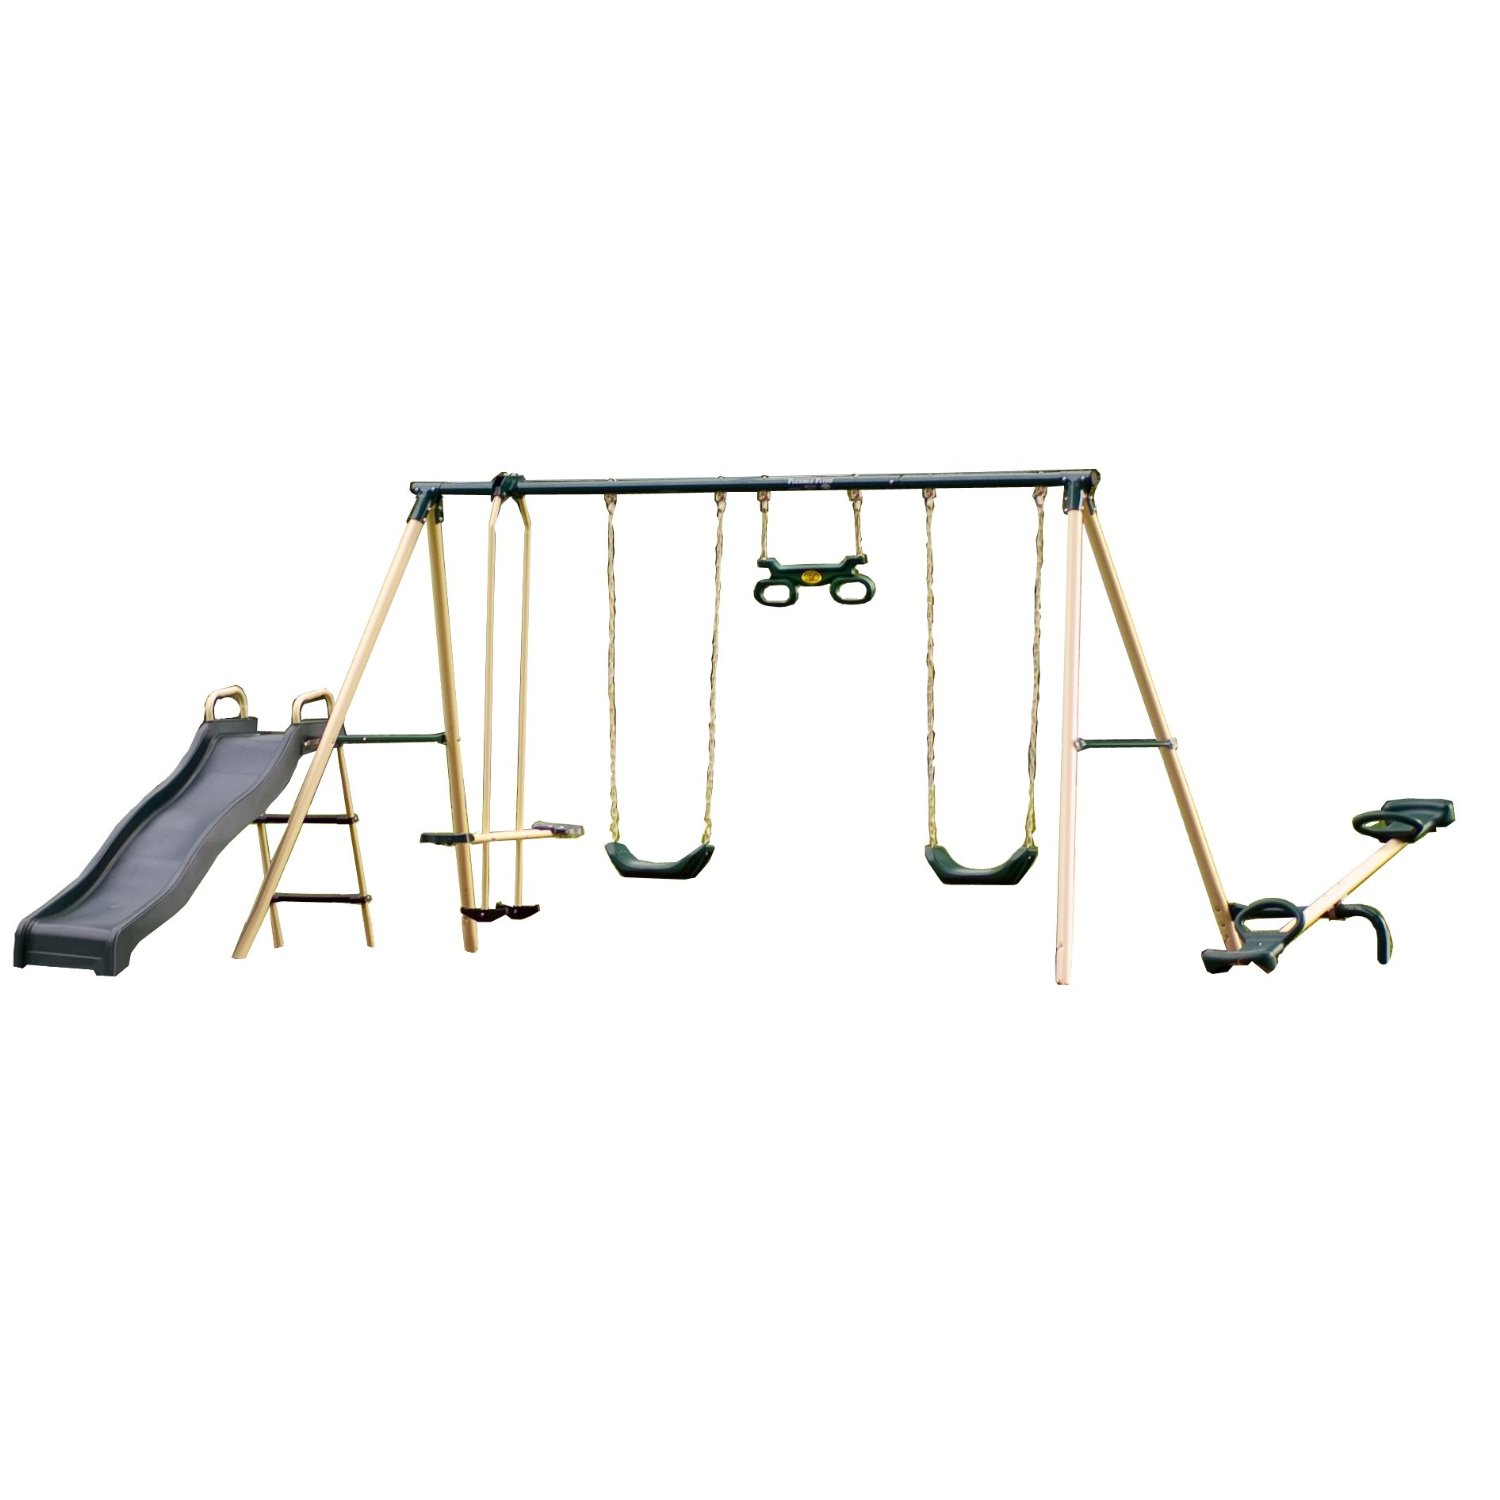 Wooden Swing Set Clip Art Images   Pictures   Becuo